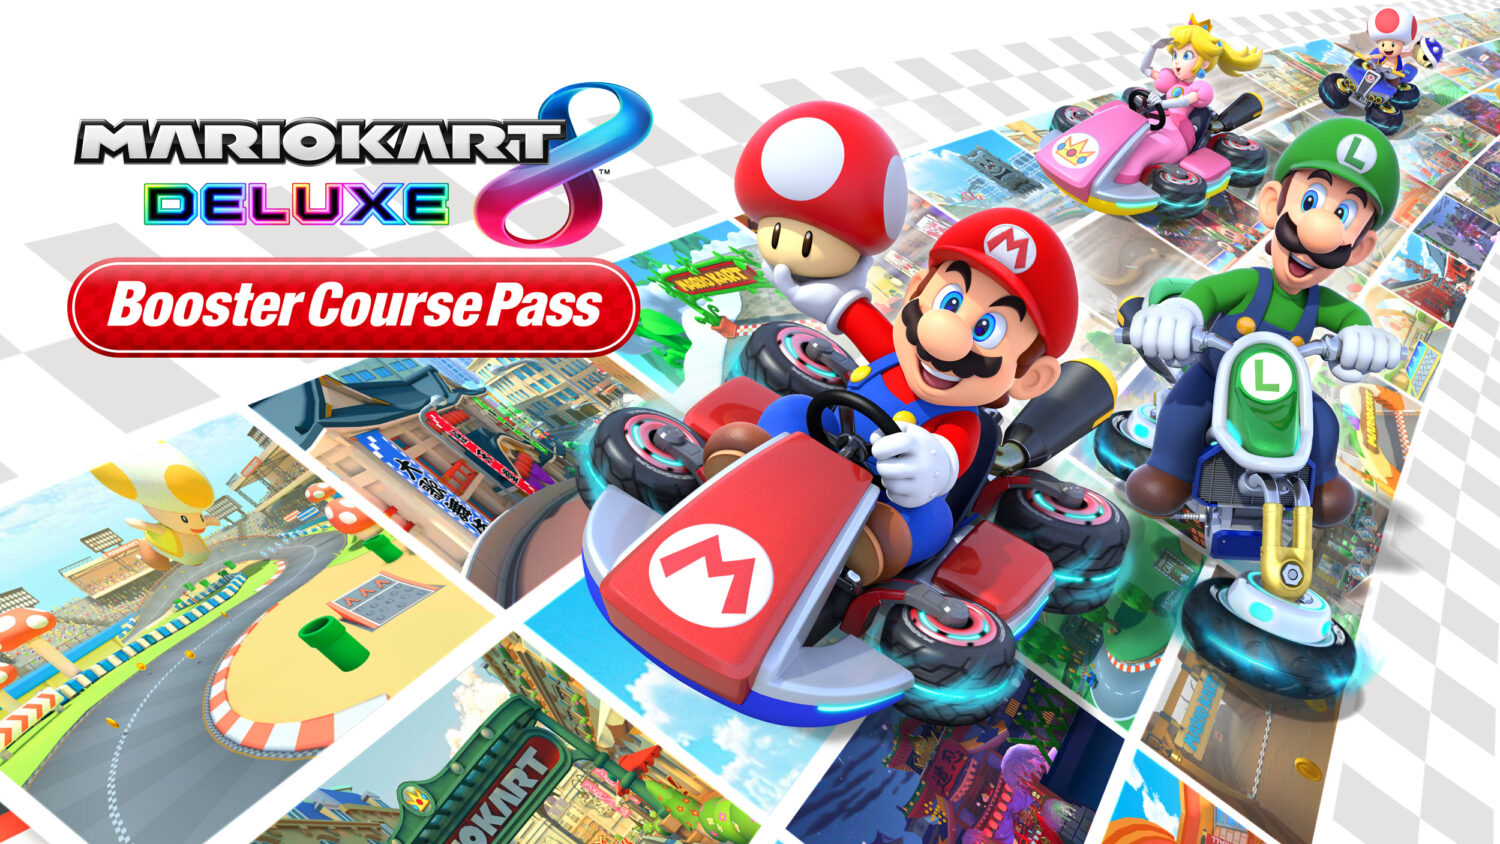 Mario Kart 8 Deluxe Booster Course Pass - wave 5